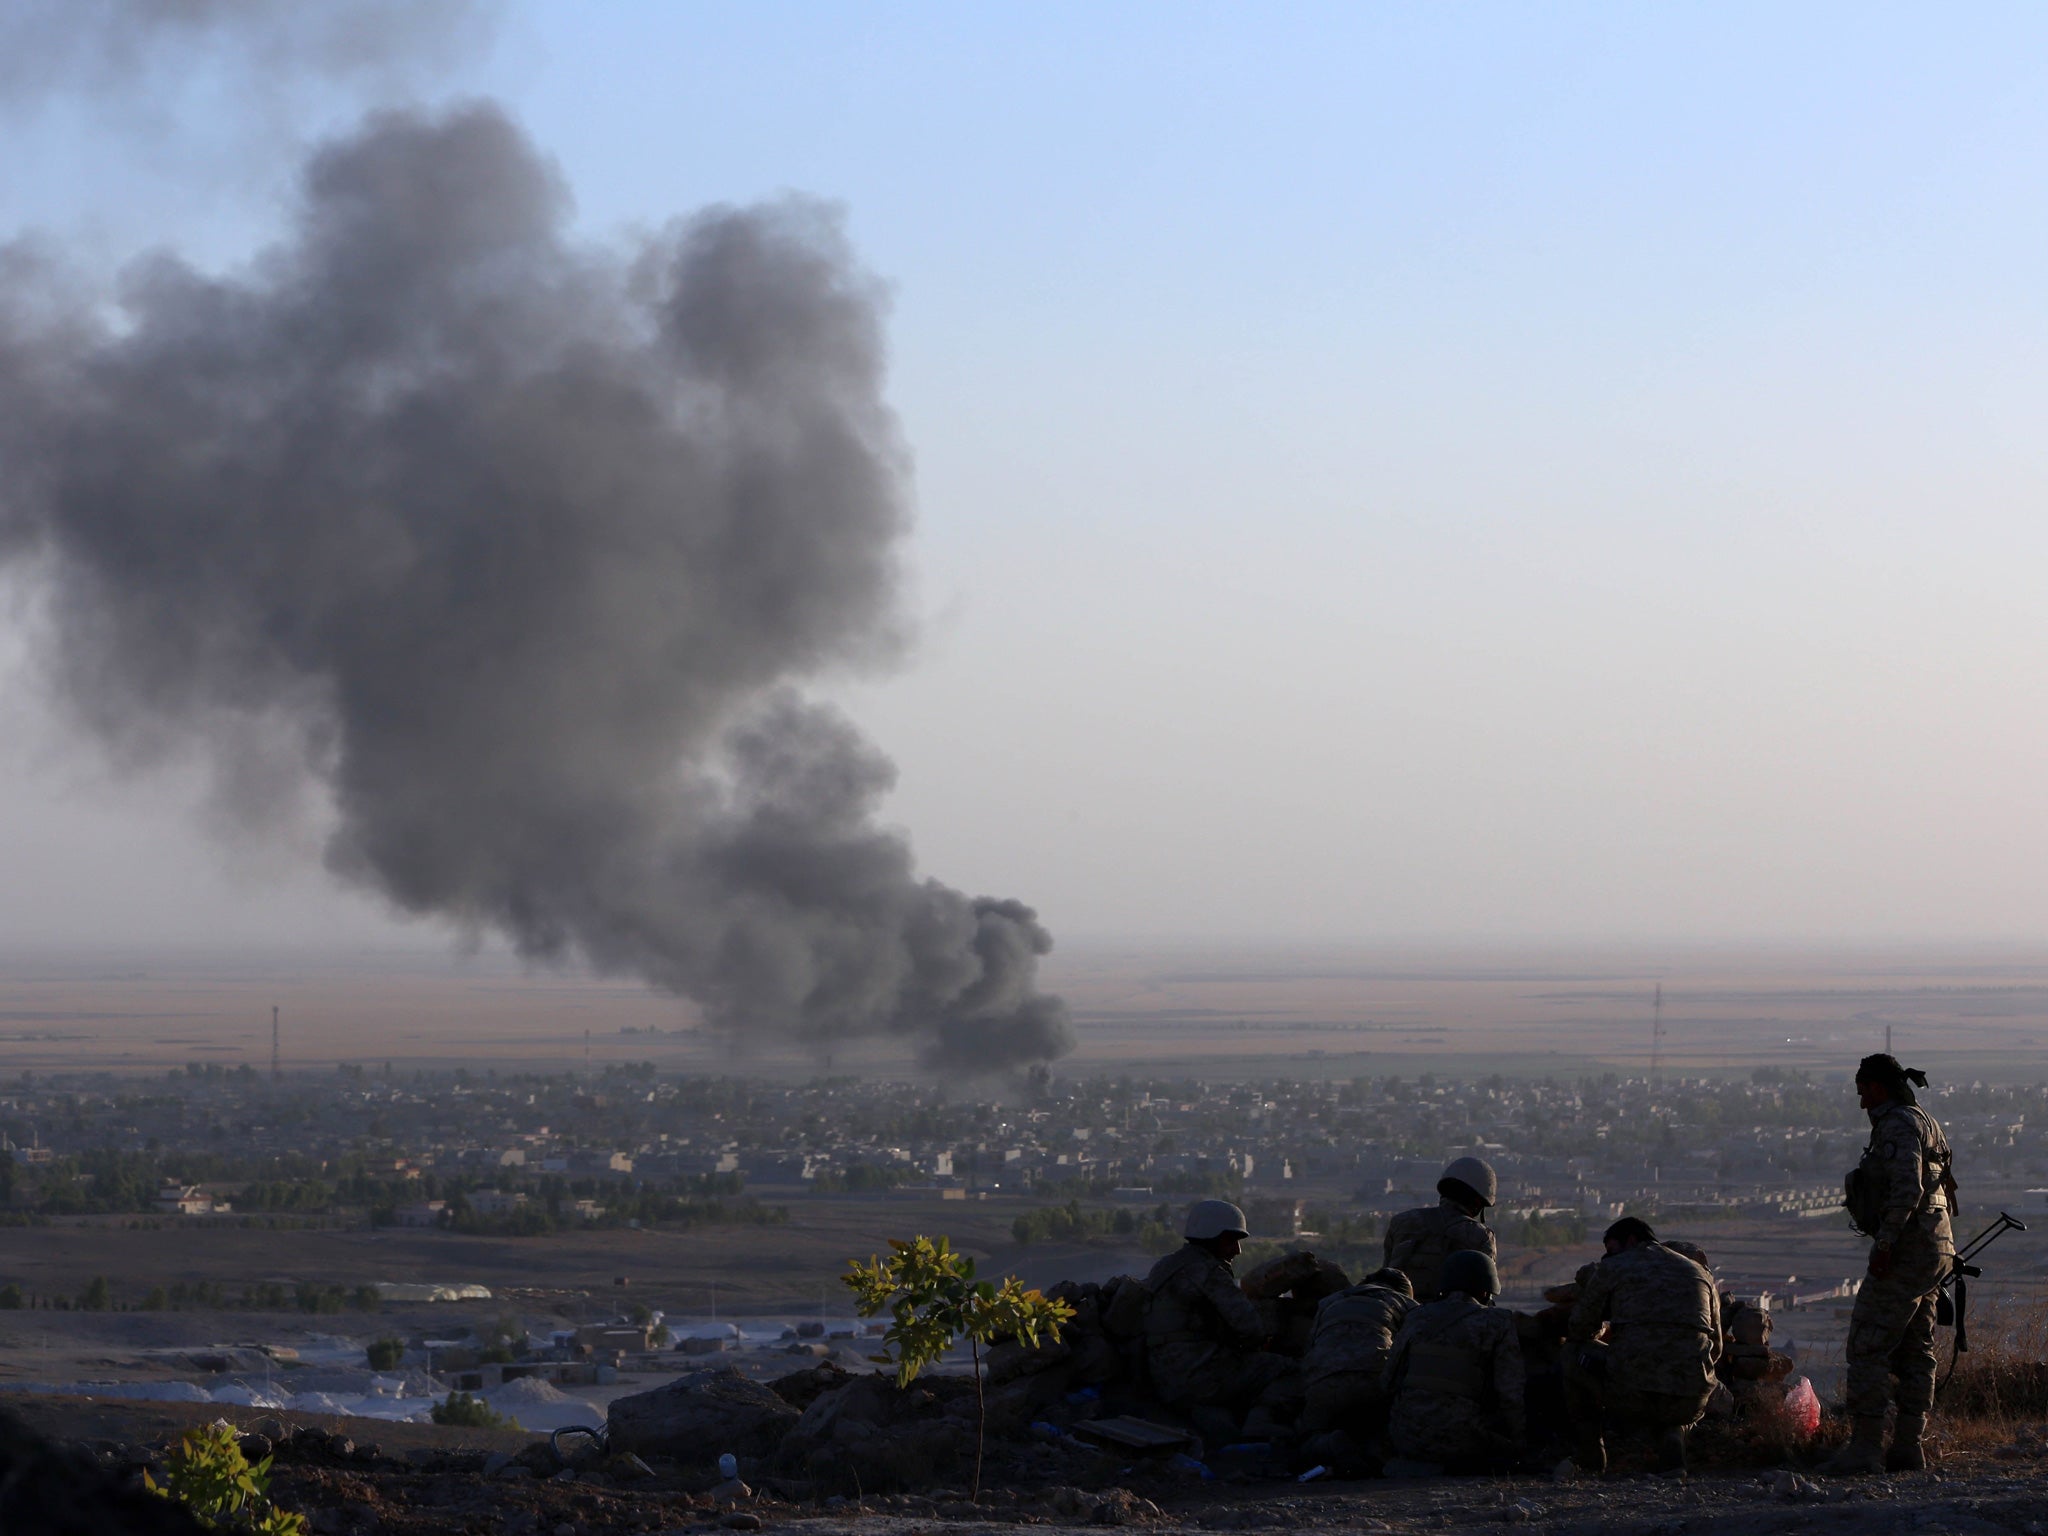 Iraqi Kurdish Peshmerga fighters look on as smoke billows from the town Makhmur, about 175 miles north of the capital Baghdad, during clashes with Isis militants